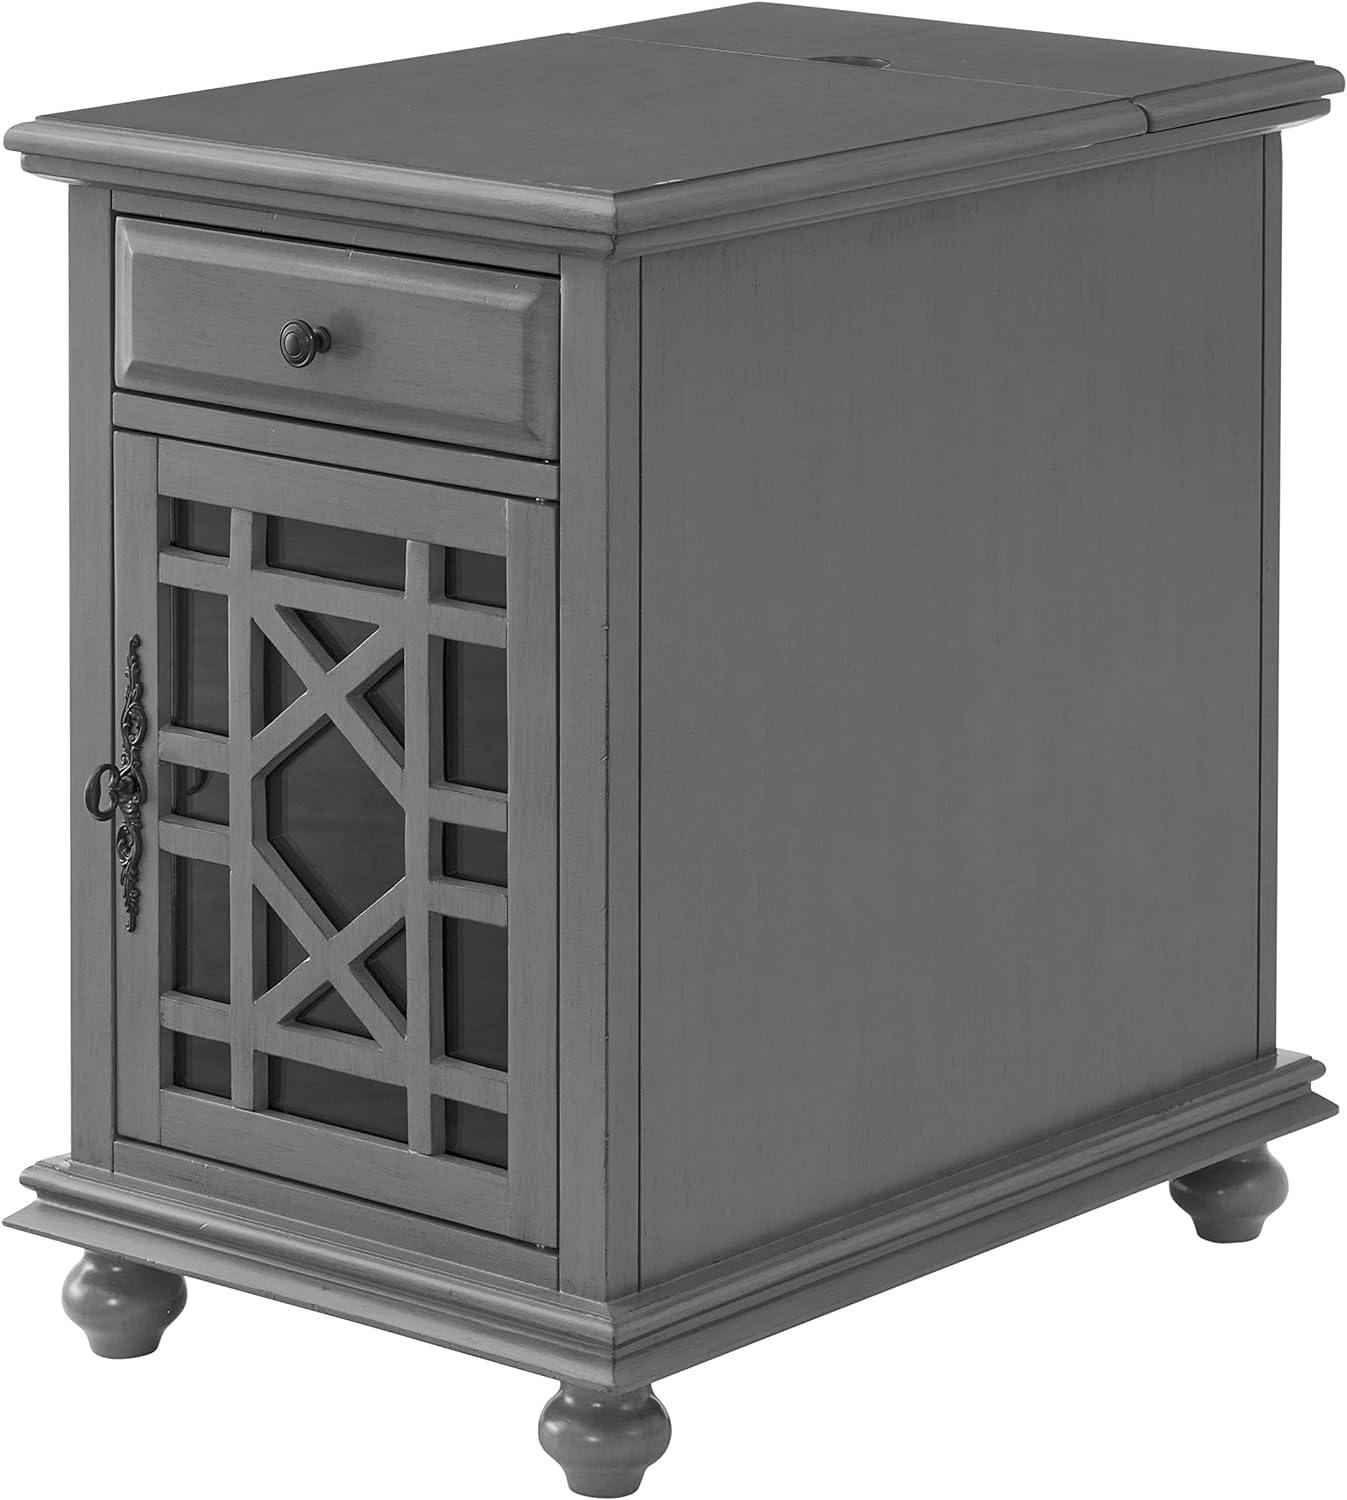 Sophisticated Gray Pine Chairside Table with Power Outlets